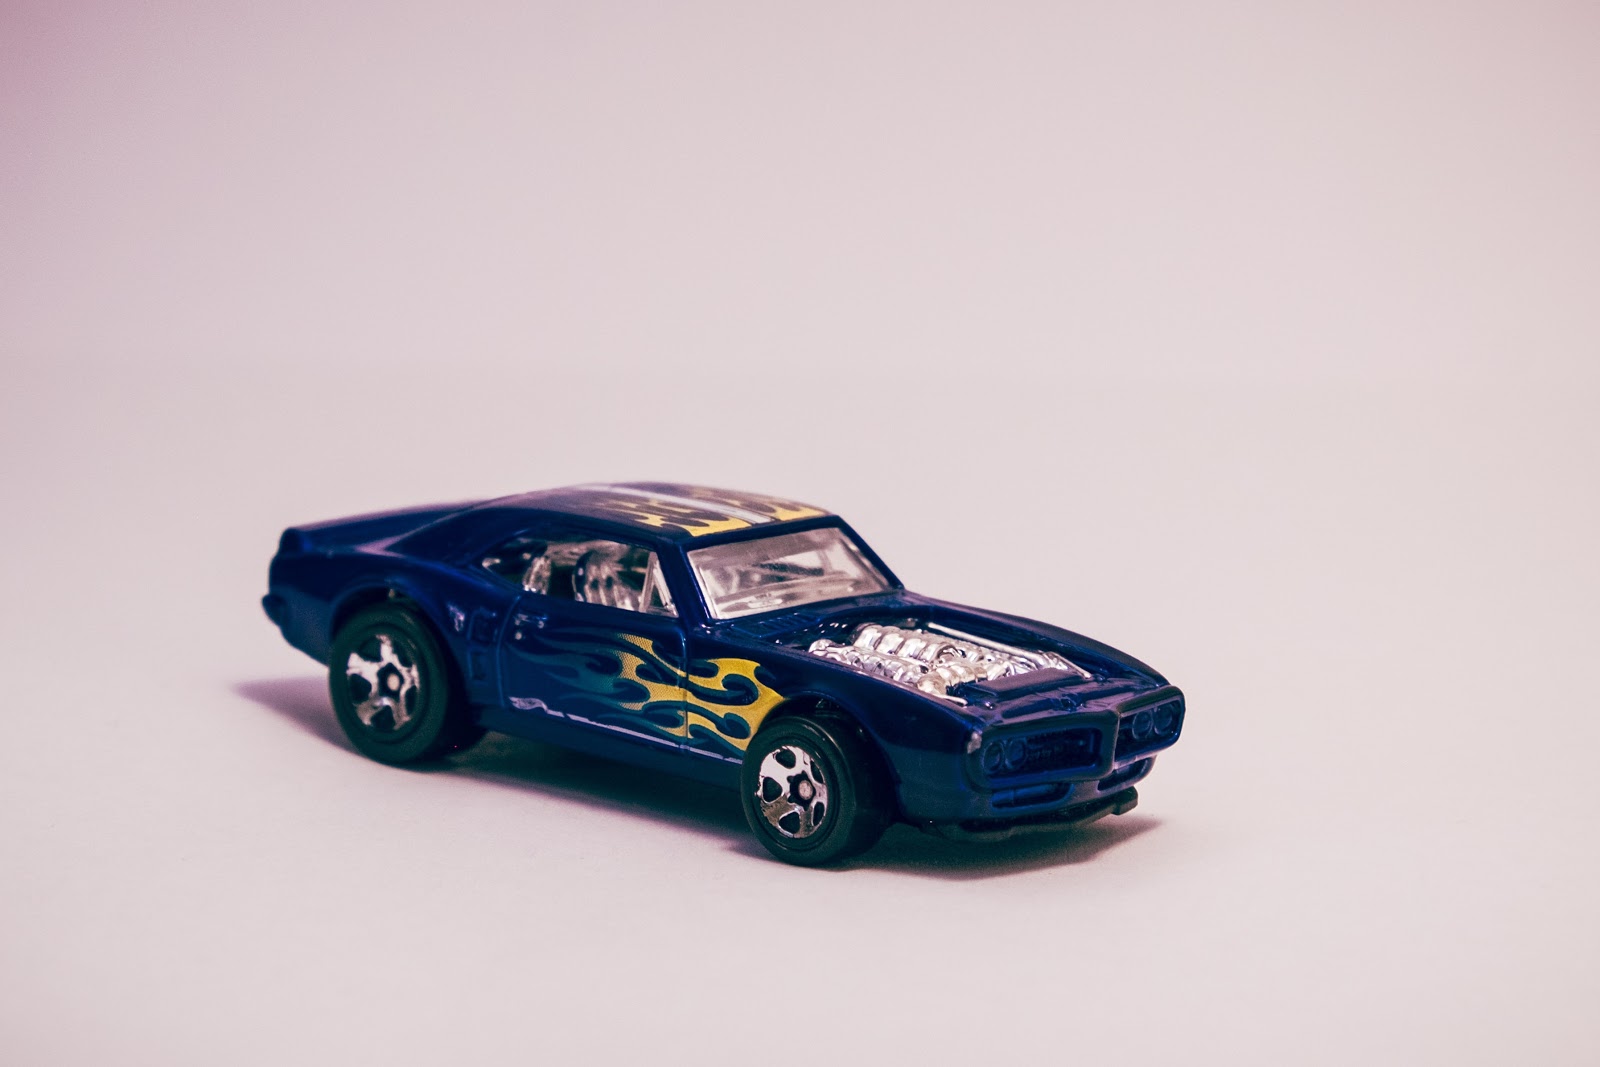 Toy muscle car